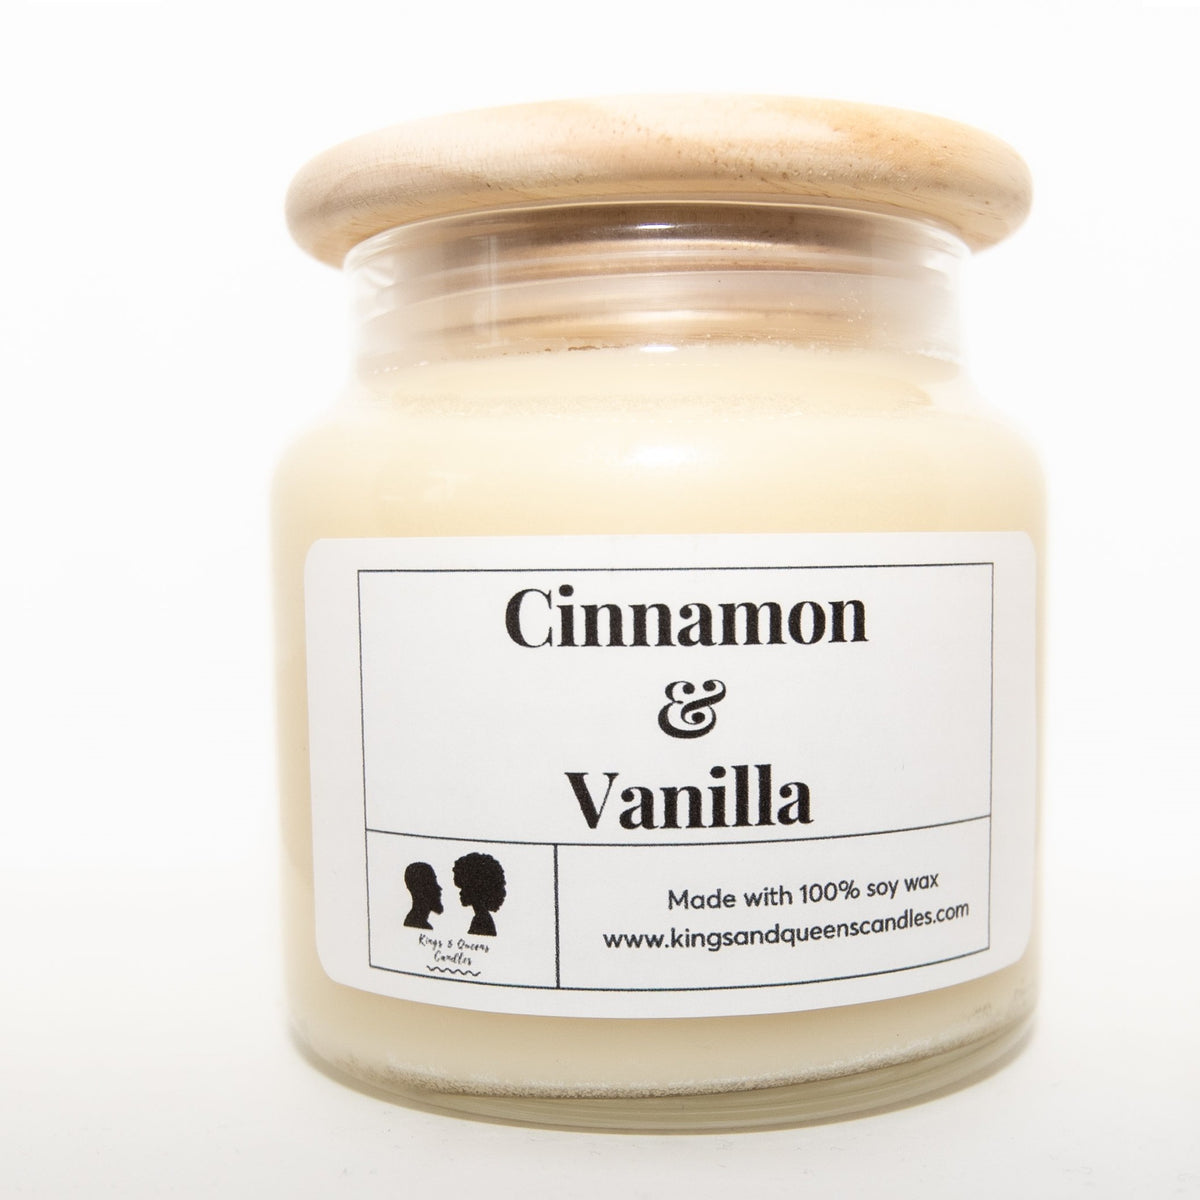 Cinnamon & Vanilla - Kings and Queens Candles